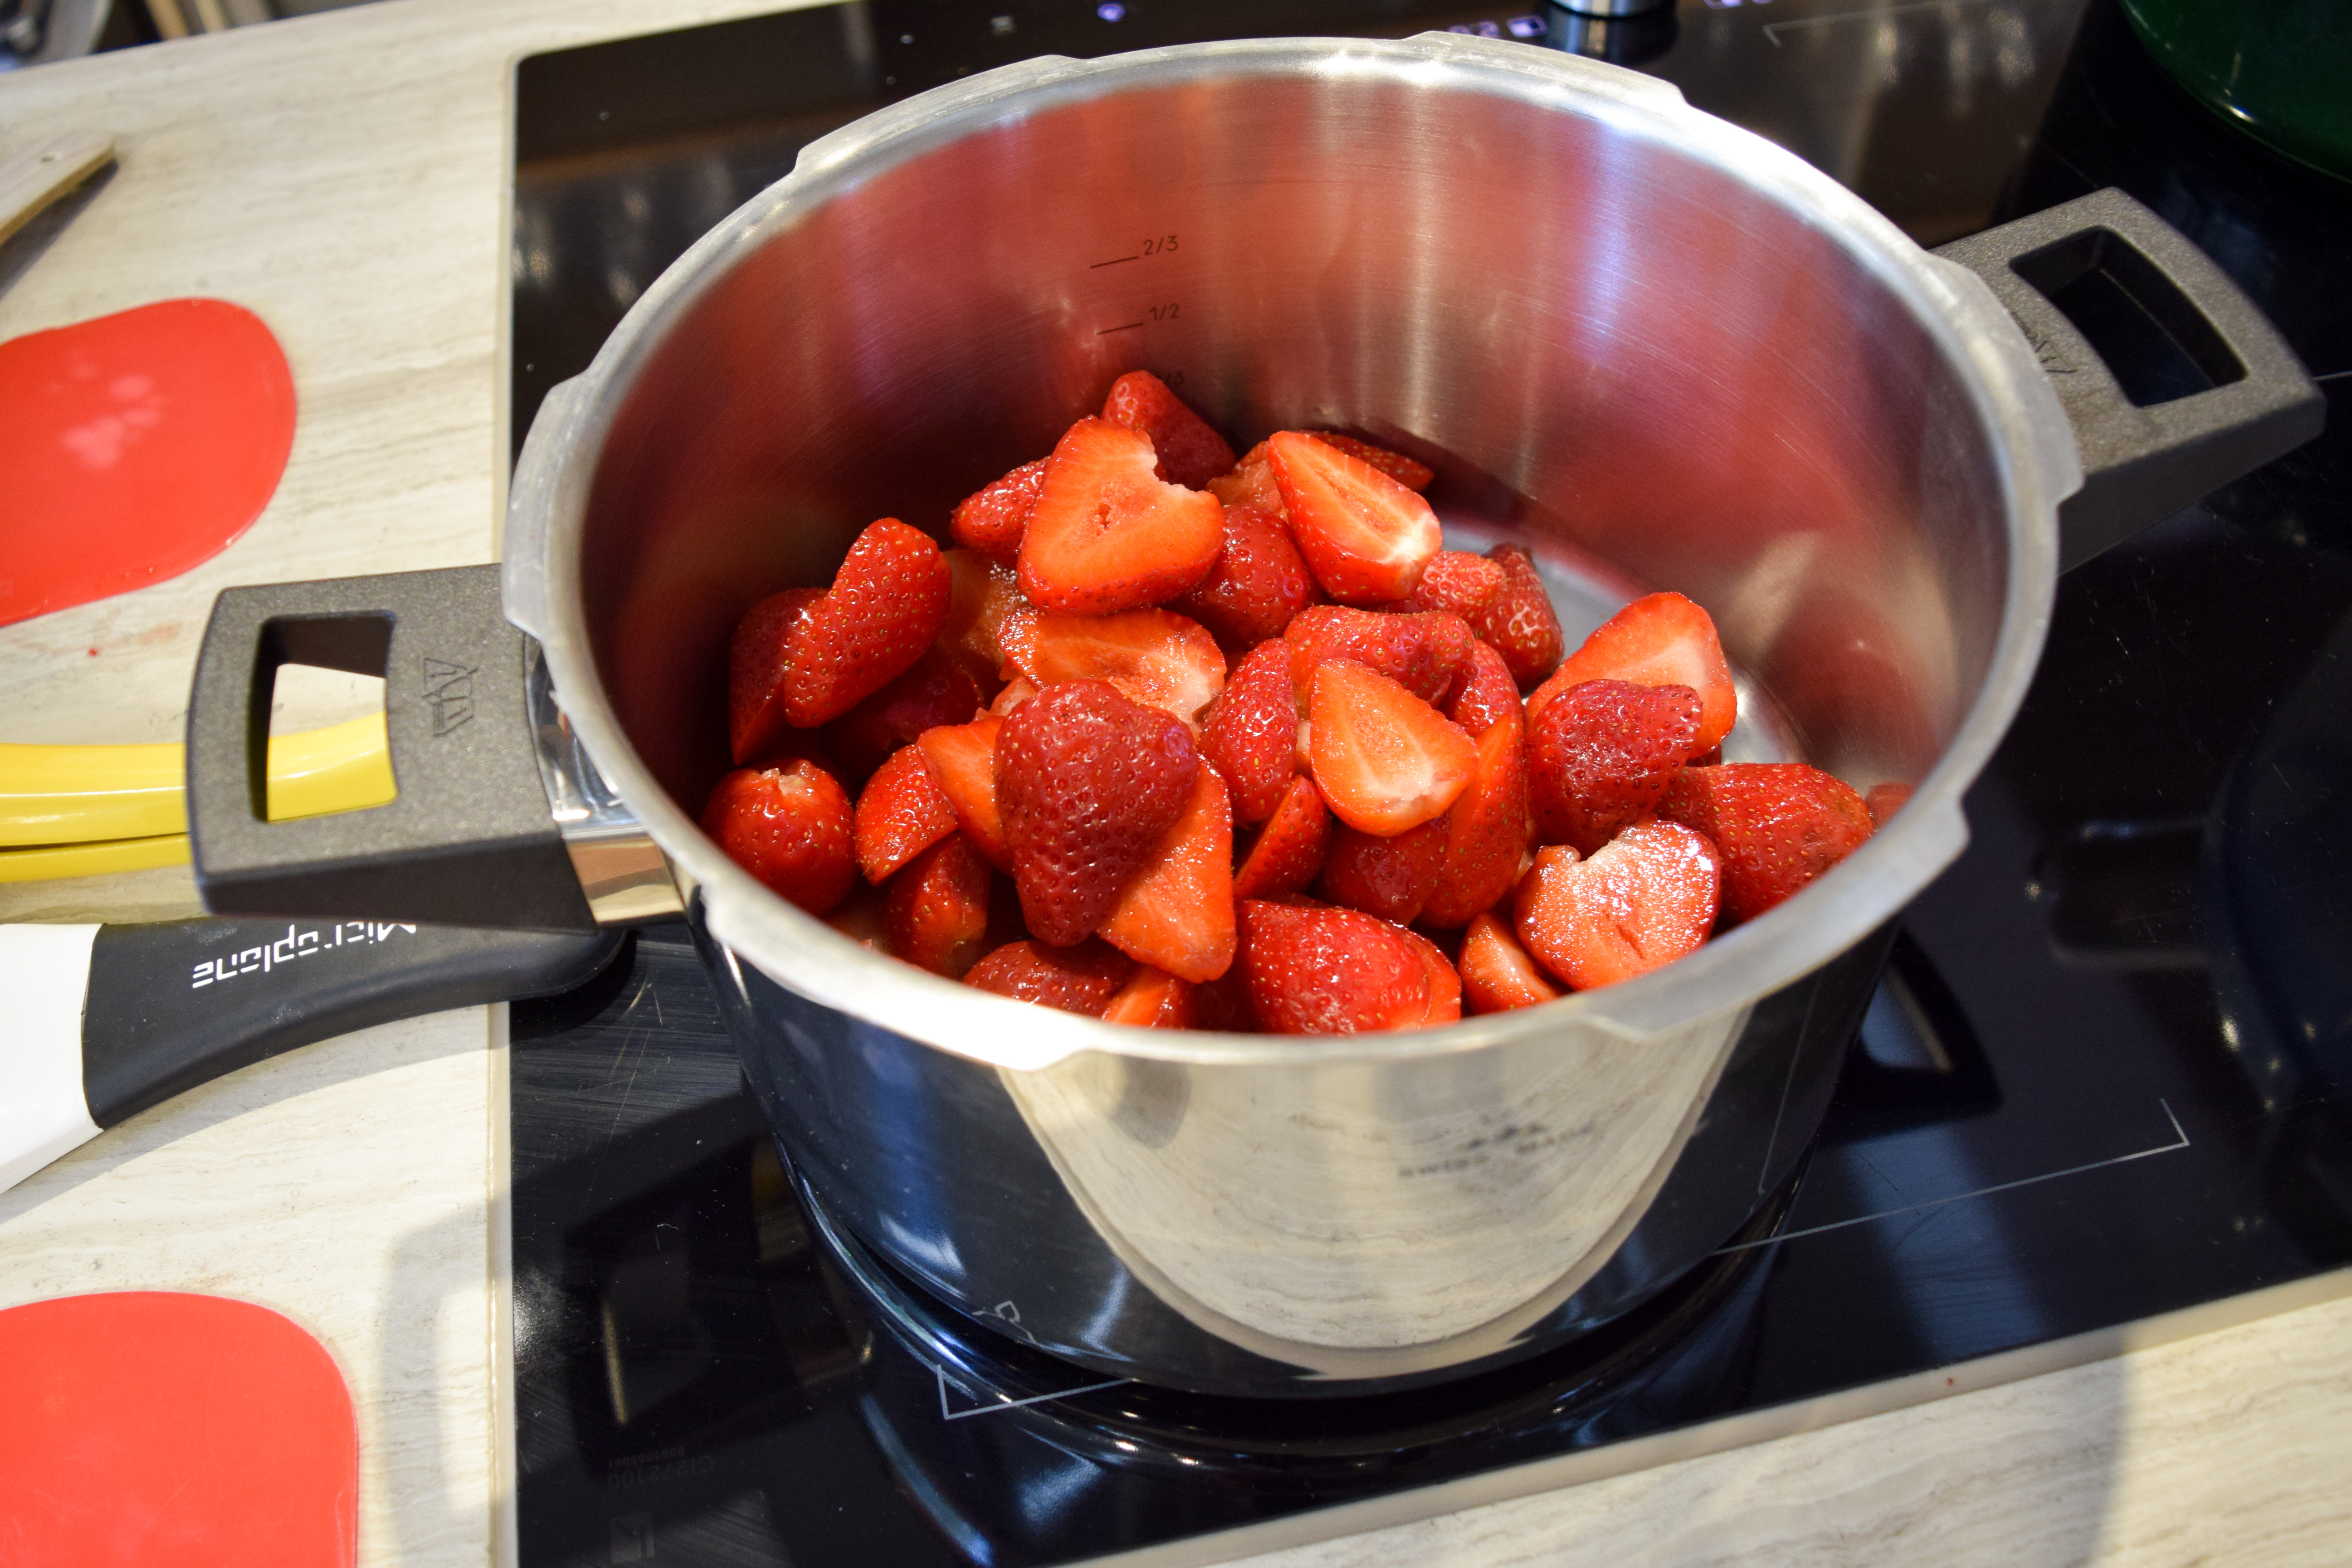 Making Low Sugar Strawberry Jam at the Jam and Preserves Masterclass at Borough Kitchen